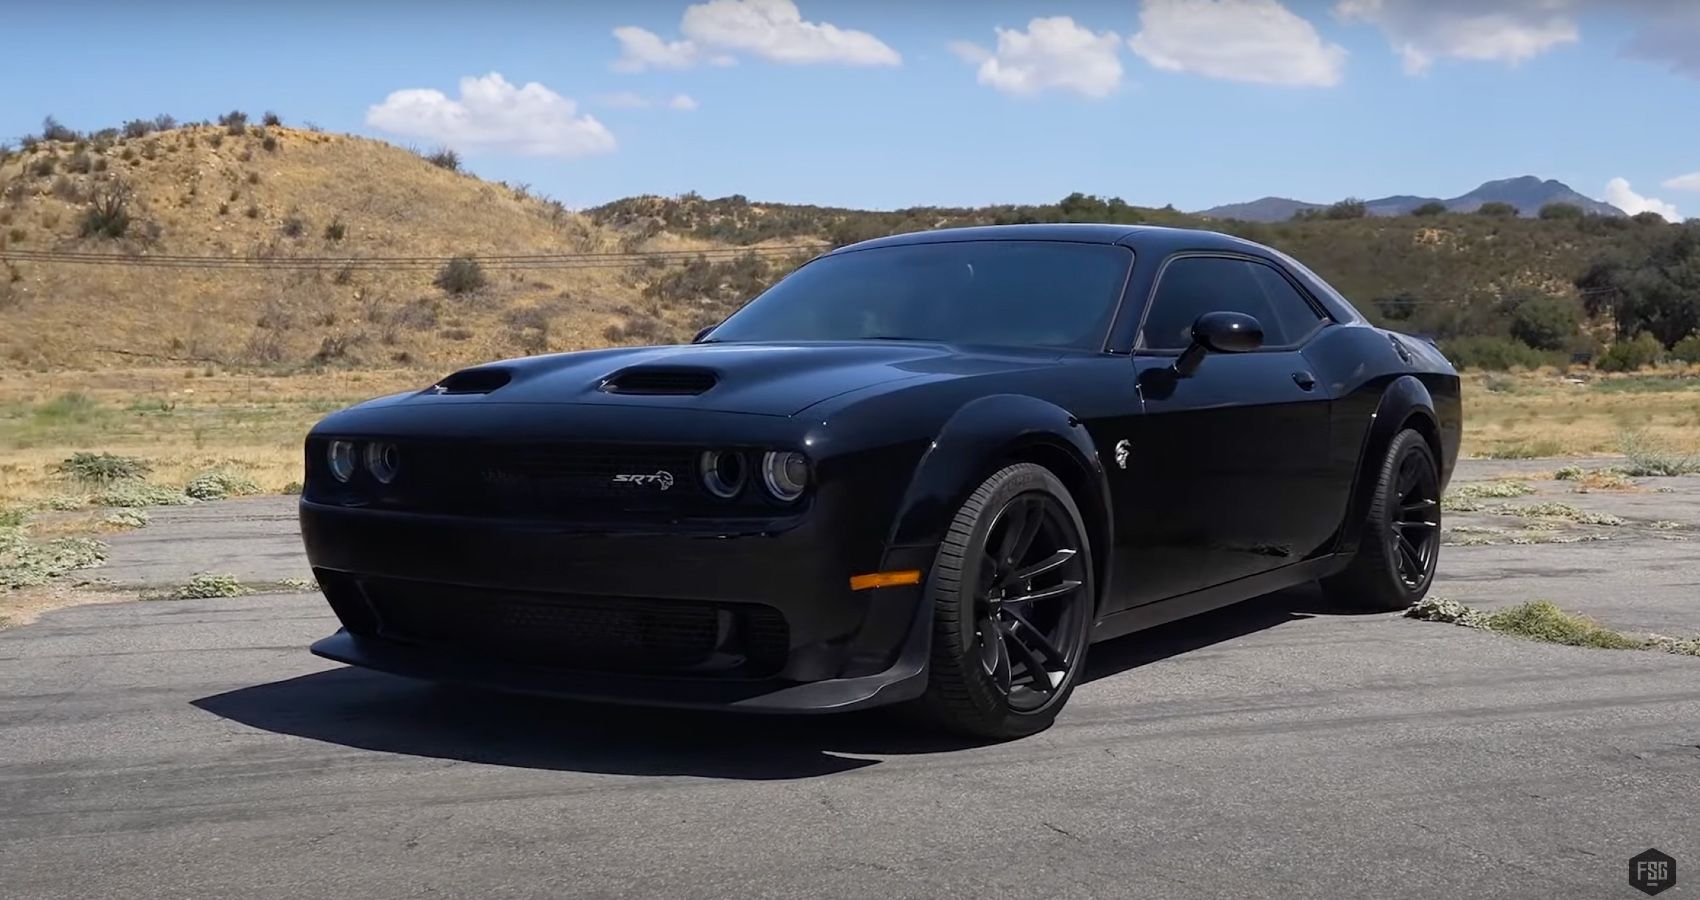 Supercharged V8 Showdown: Camaro ZL1 Vs Challenger Hellcat, Plus $10,000 Giveaway!